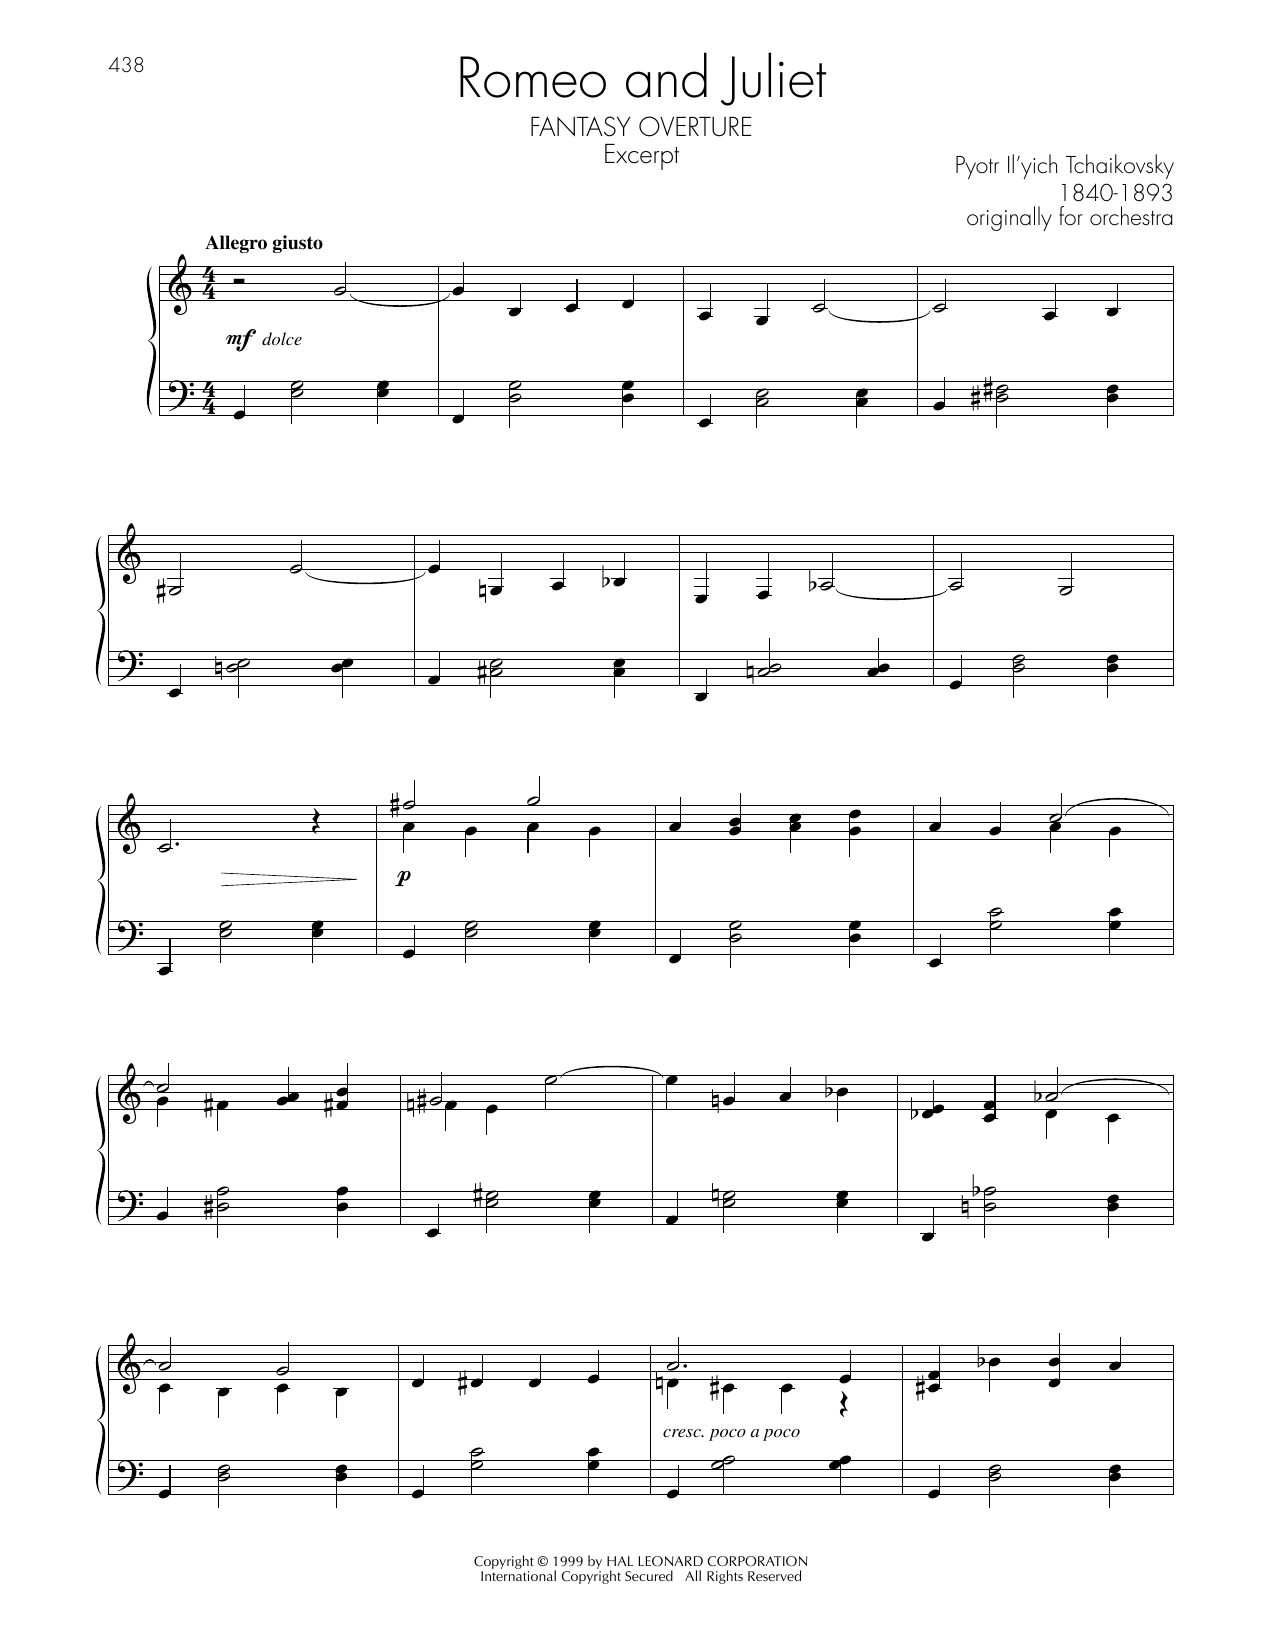 Pyotr Il'yich Tchaikovsky Fantasy Overture Excerpt sheet music notes printable PDF score